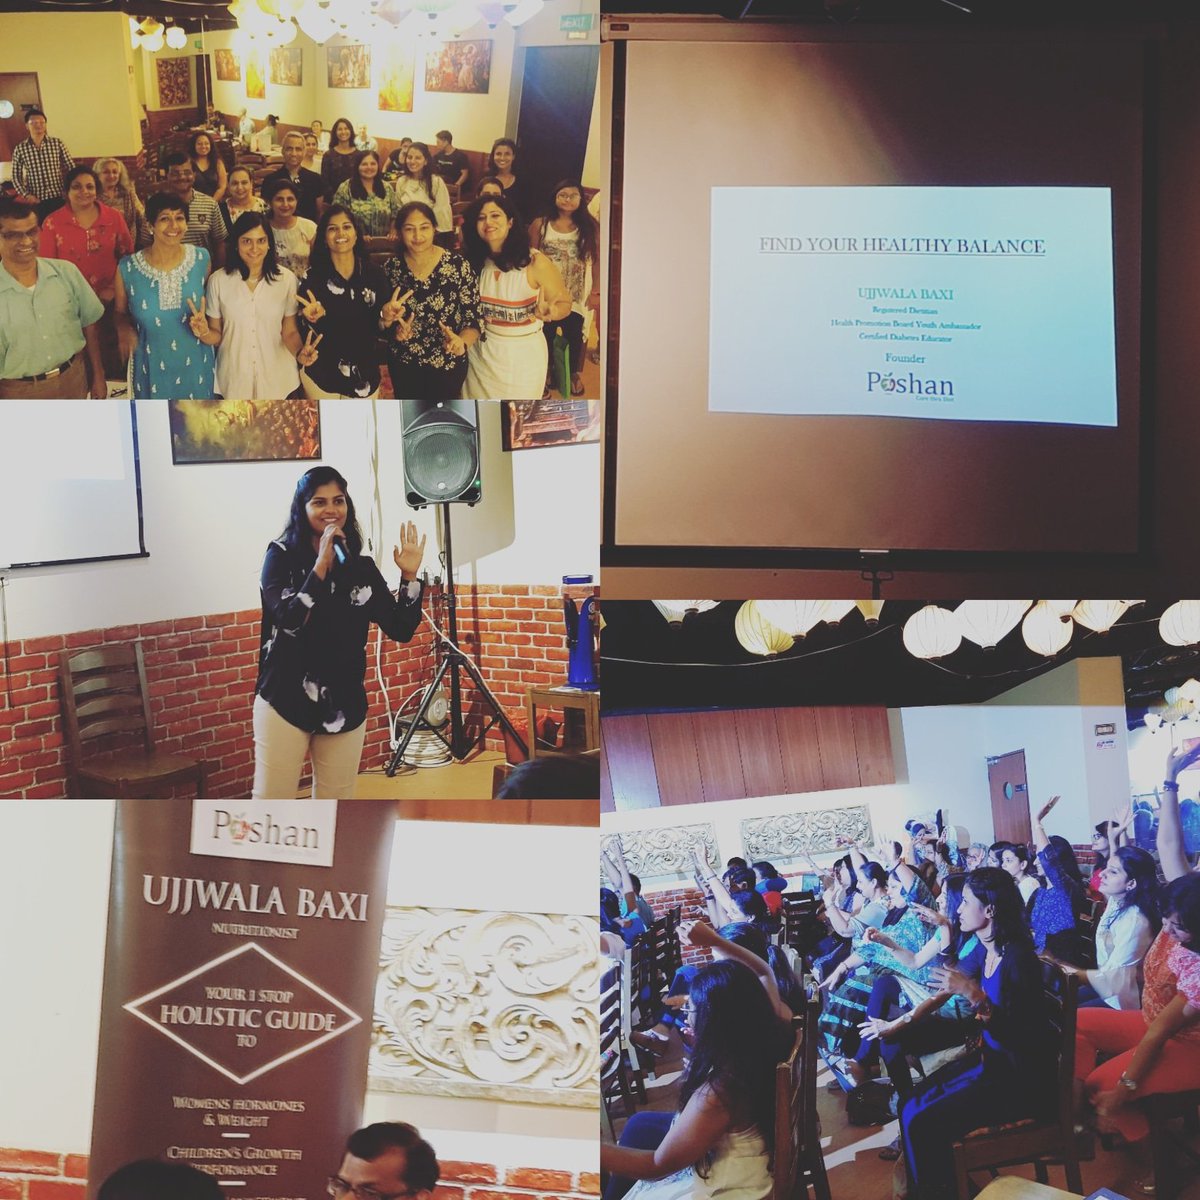 Woooow..what an incredible talk by @poshan_cure_thru_diet  ..it was great learning and got sooo any tips related to taking care for nutrition for family and for self too:))..do watch out for Womenlines sharing key points about the talk soon...
#eventsinsingapore  #healthtalk